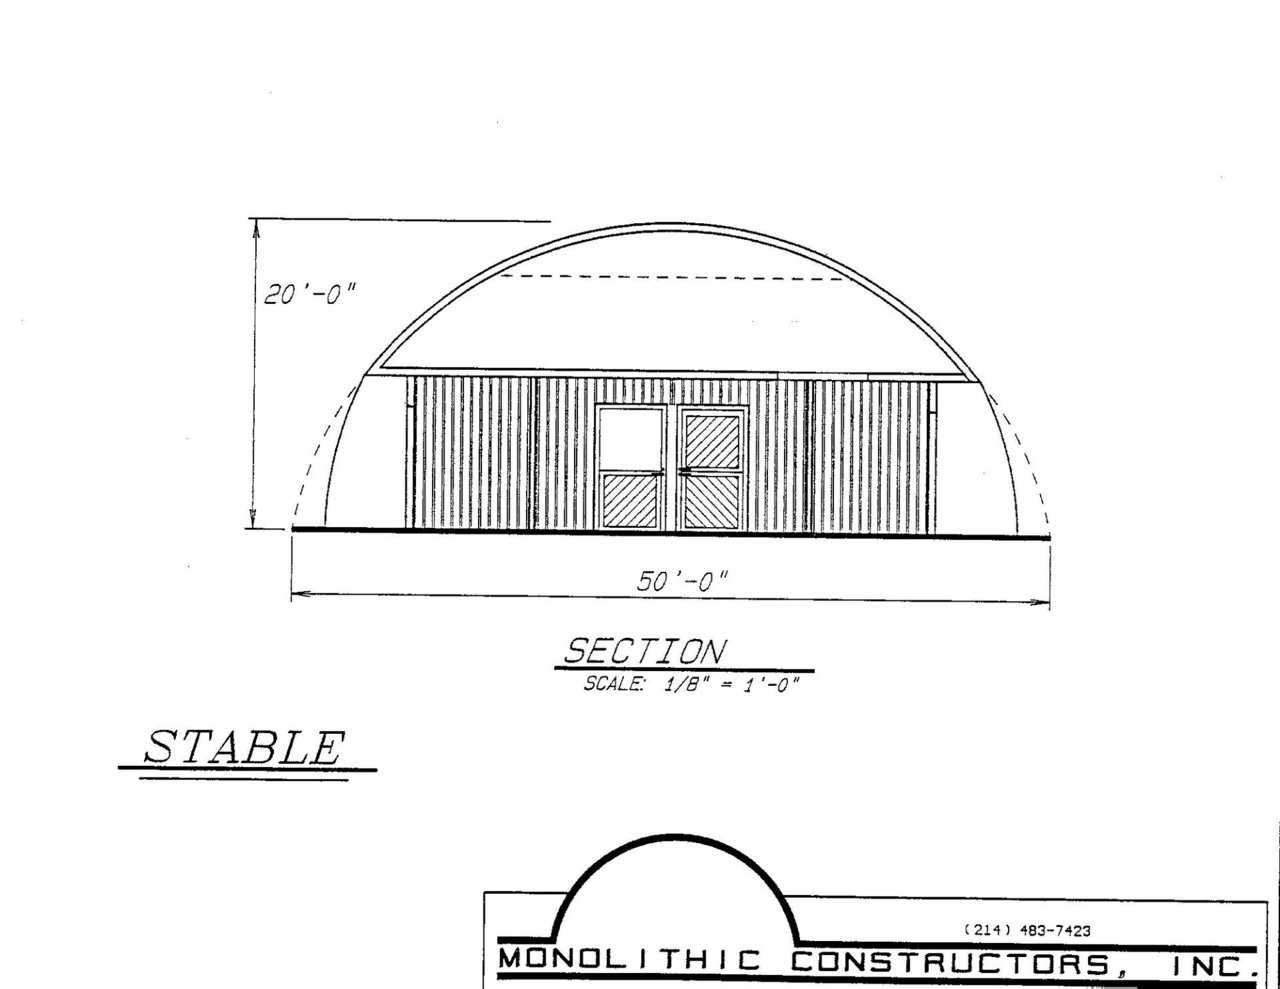 Artist’s rendering of simple horse stable and riding arena.